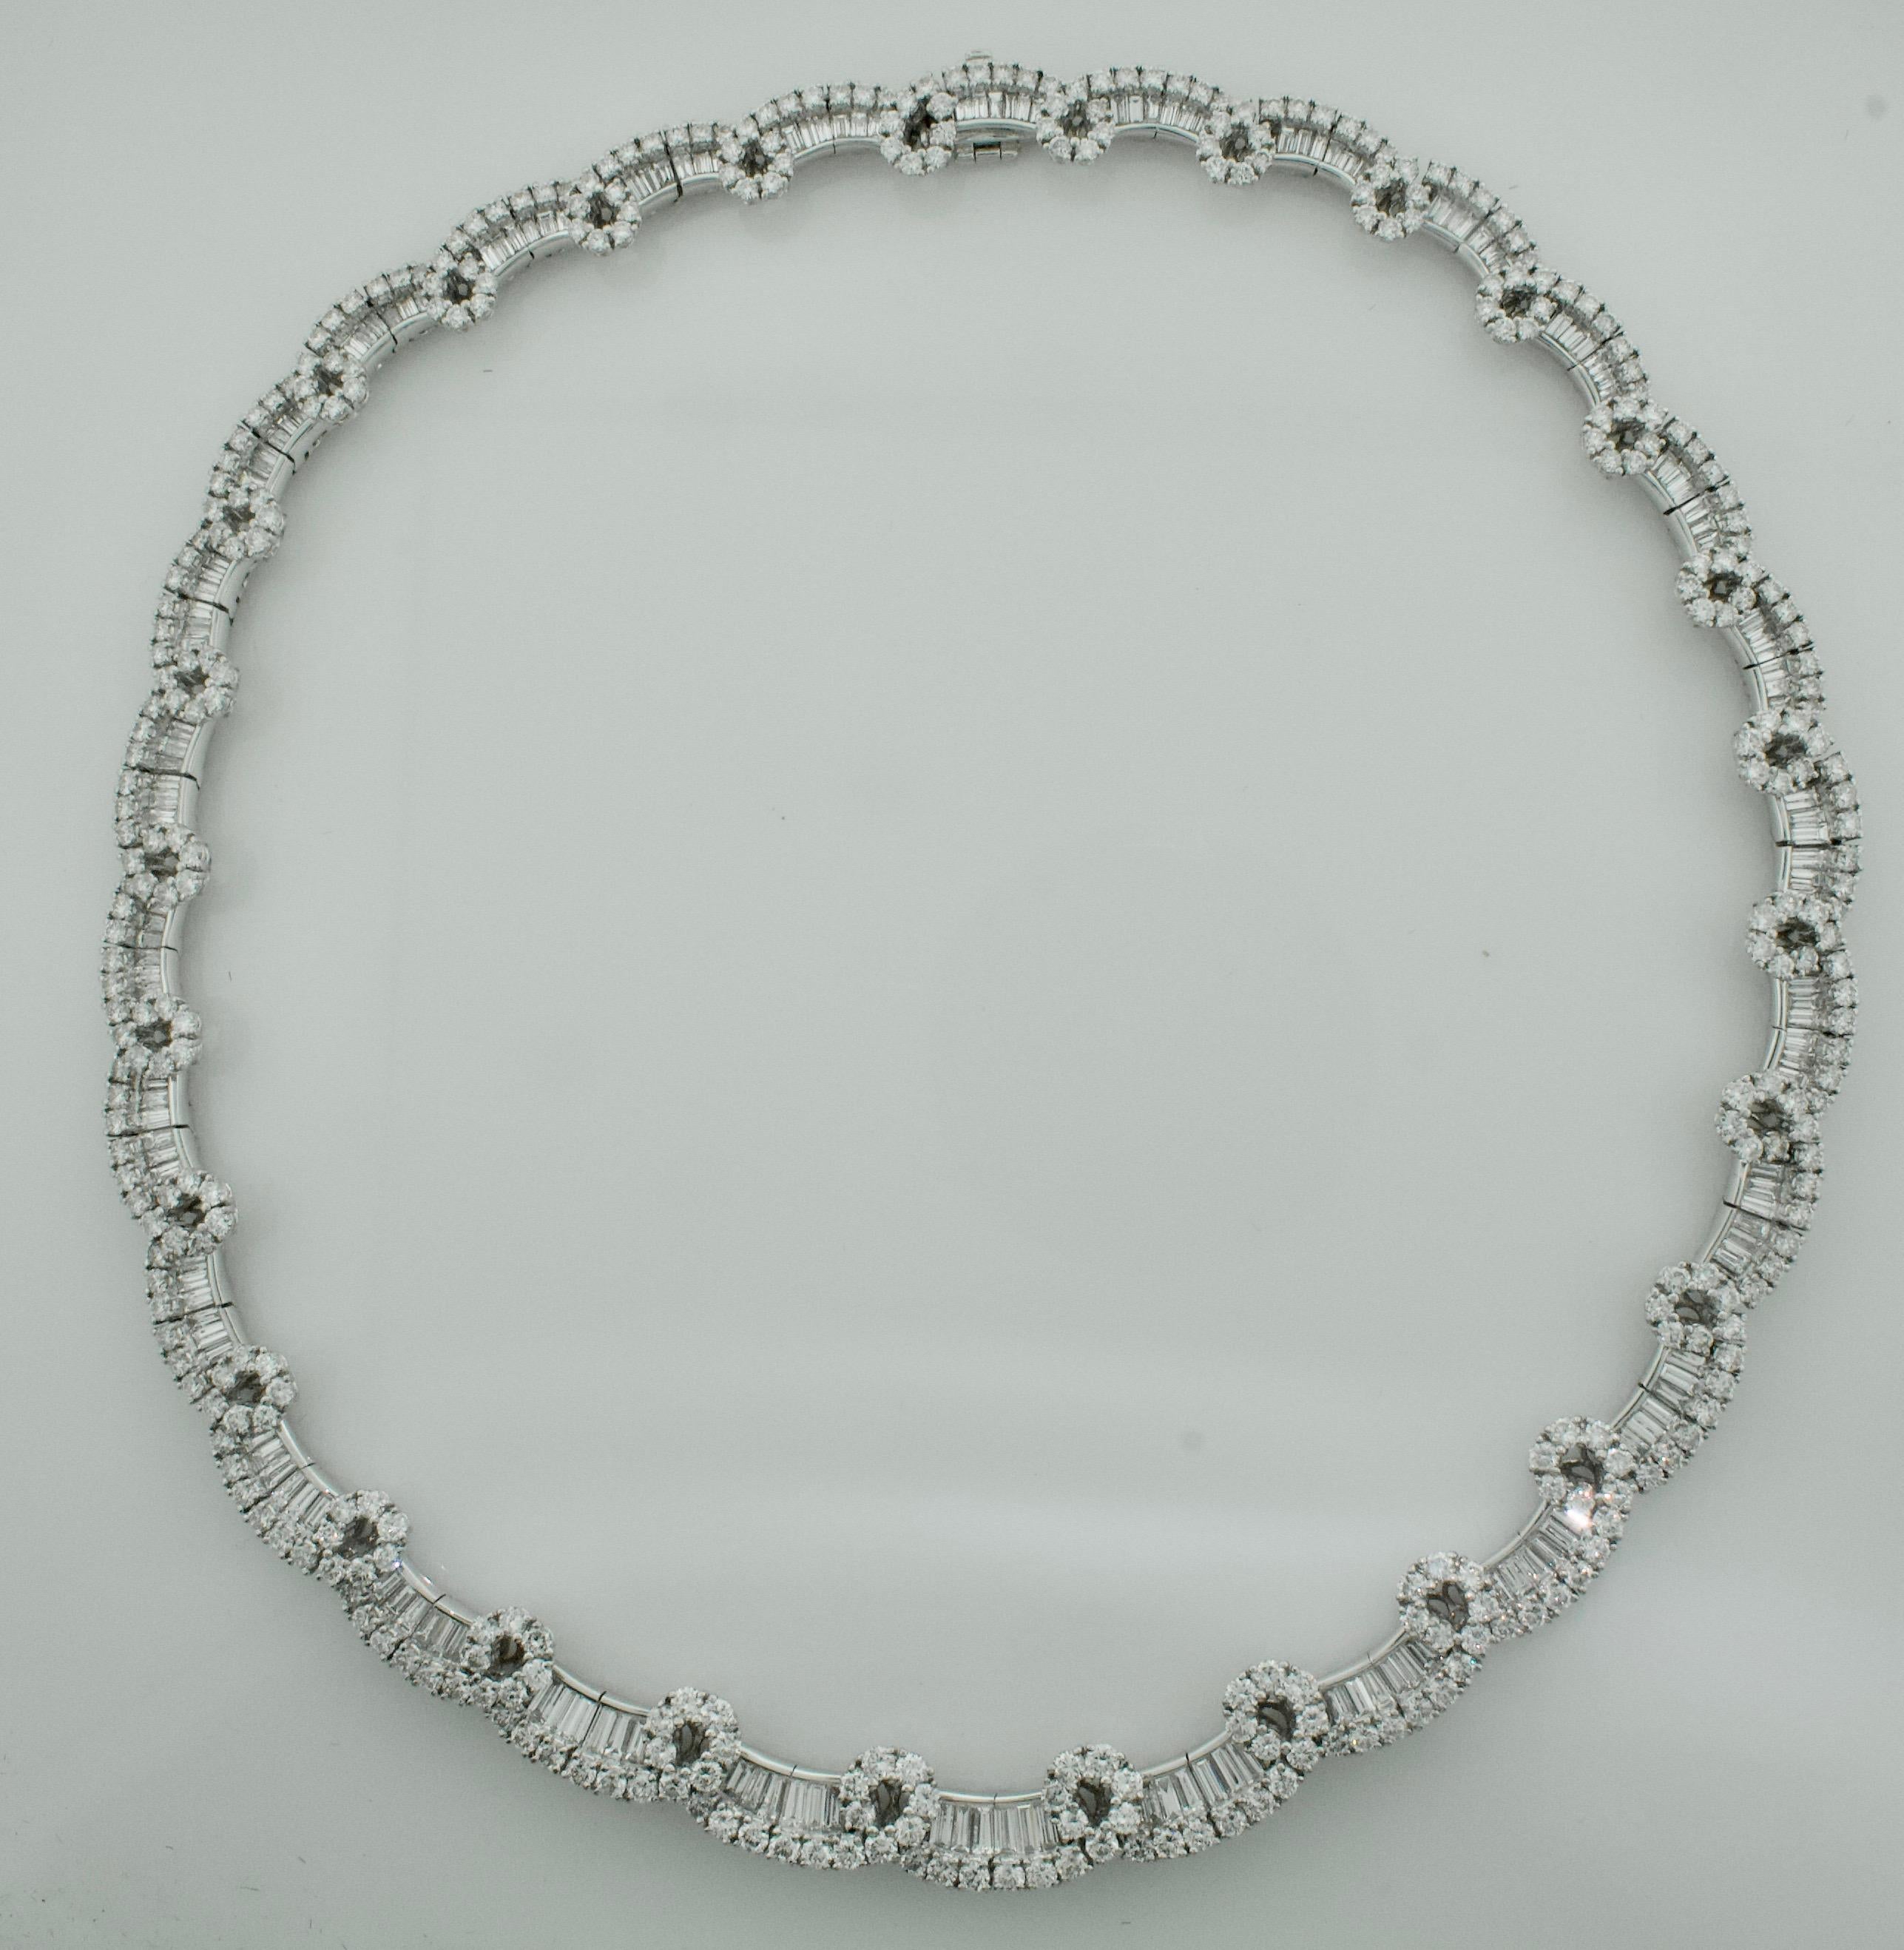 Important Dynamic Diamond Necklace in Platinum 24.07 carats
Five Hundred and Fifty One Round Brilliant and Baguette Cut Diamonds Weighing 24.07 Carats [GHI - VVS - SI] [bright with no imperfections visible to the naked eye]
Very Very Comfortable 